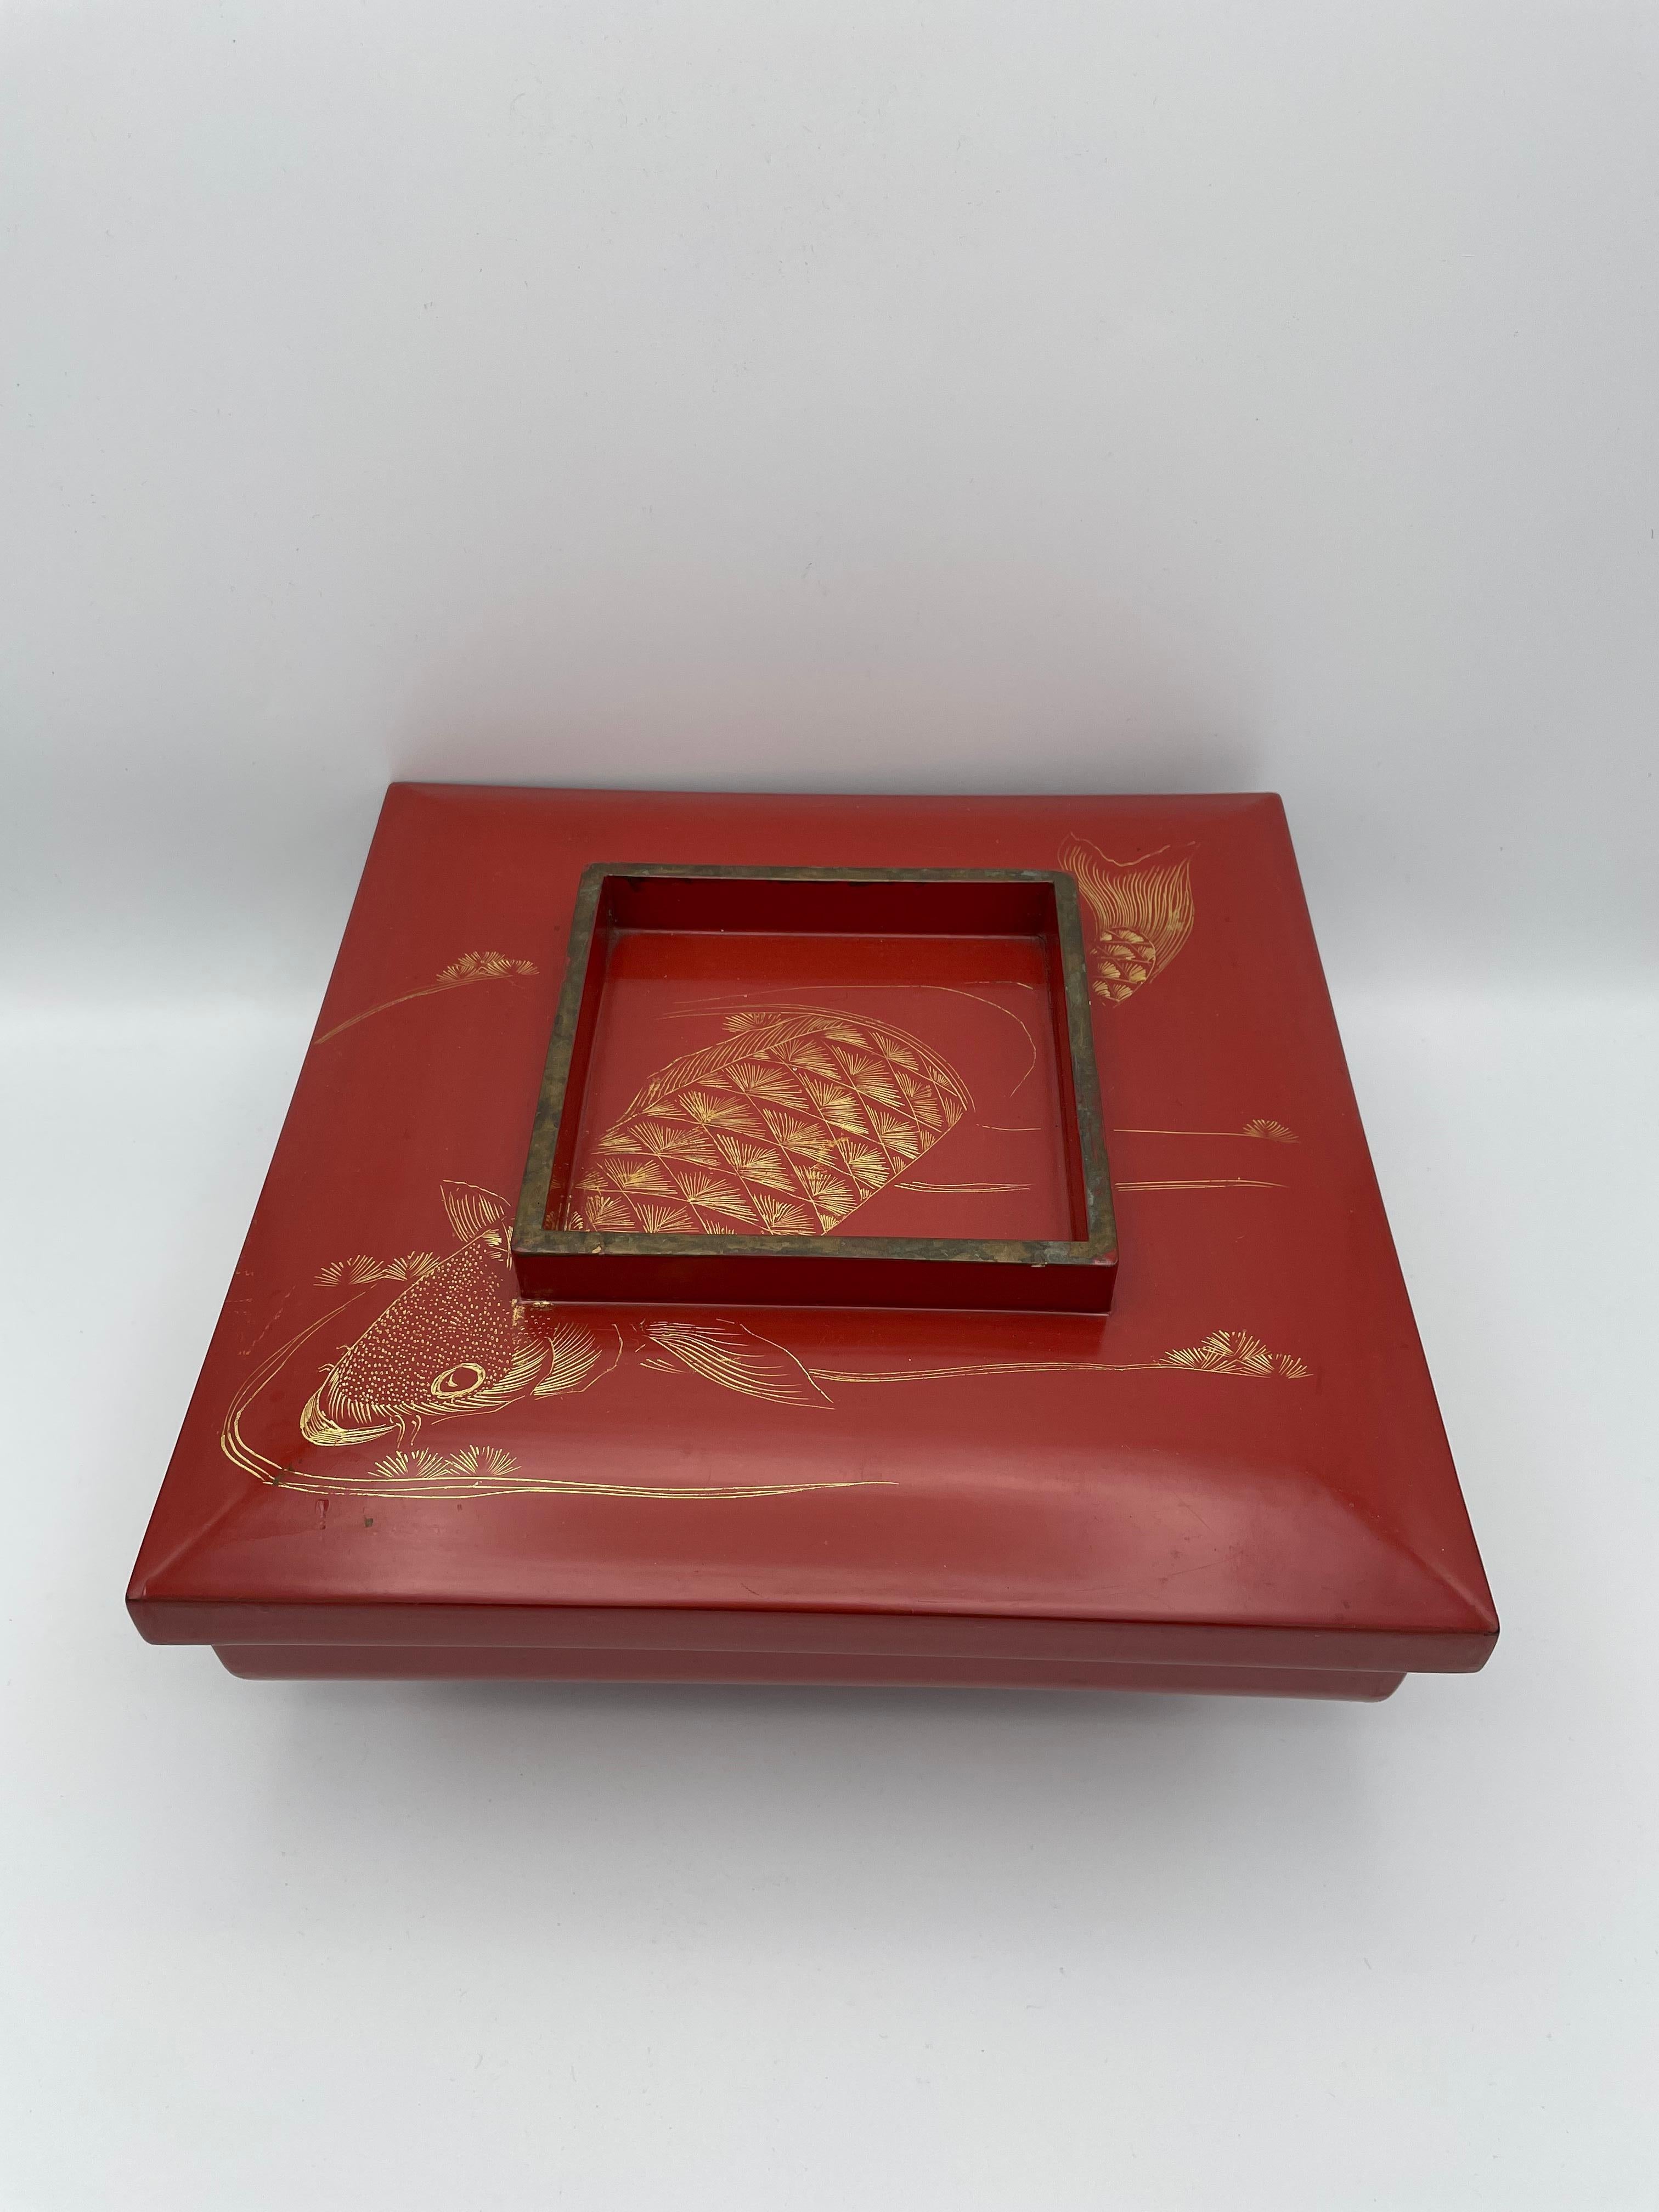 This is an antique lacquered box with a lid made around 1950-1970s in Showa era. The dimensions are 25.5 ×25.5 × H9.5cm.
It can be used as a jewelry box or a decoration object.
The lid of this box is engraved in gold with a picture of a carp